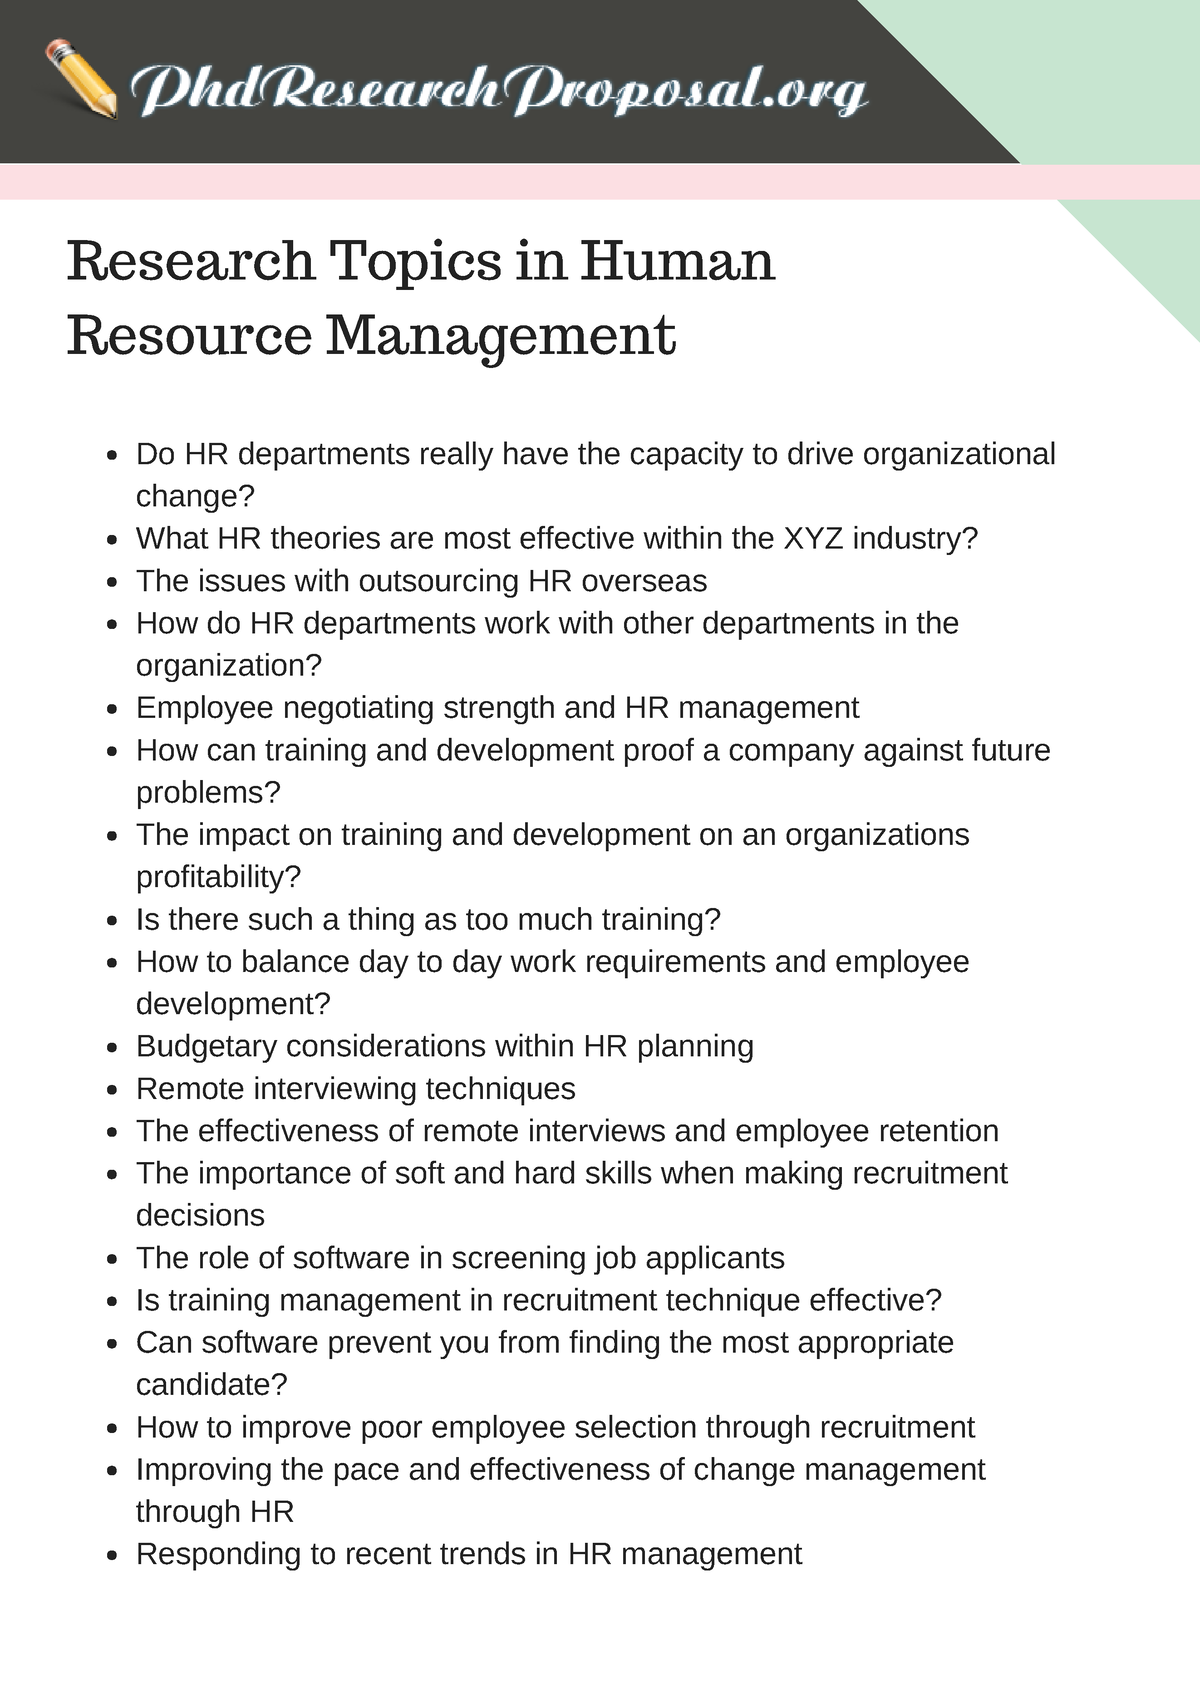 human resource management research topics 2021